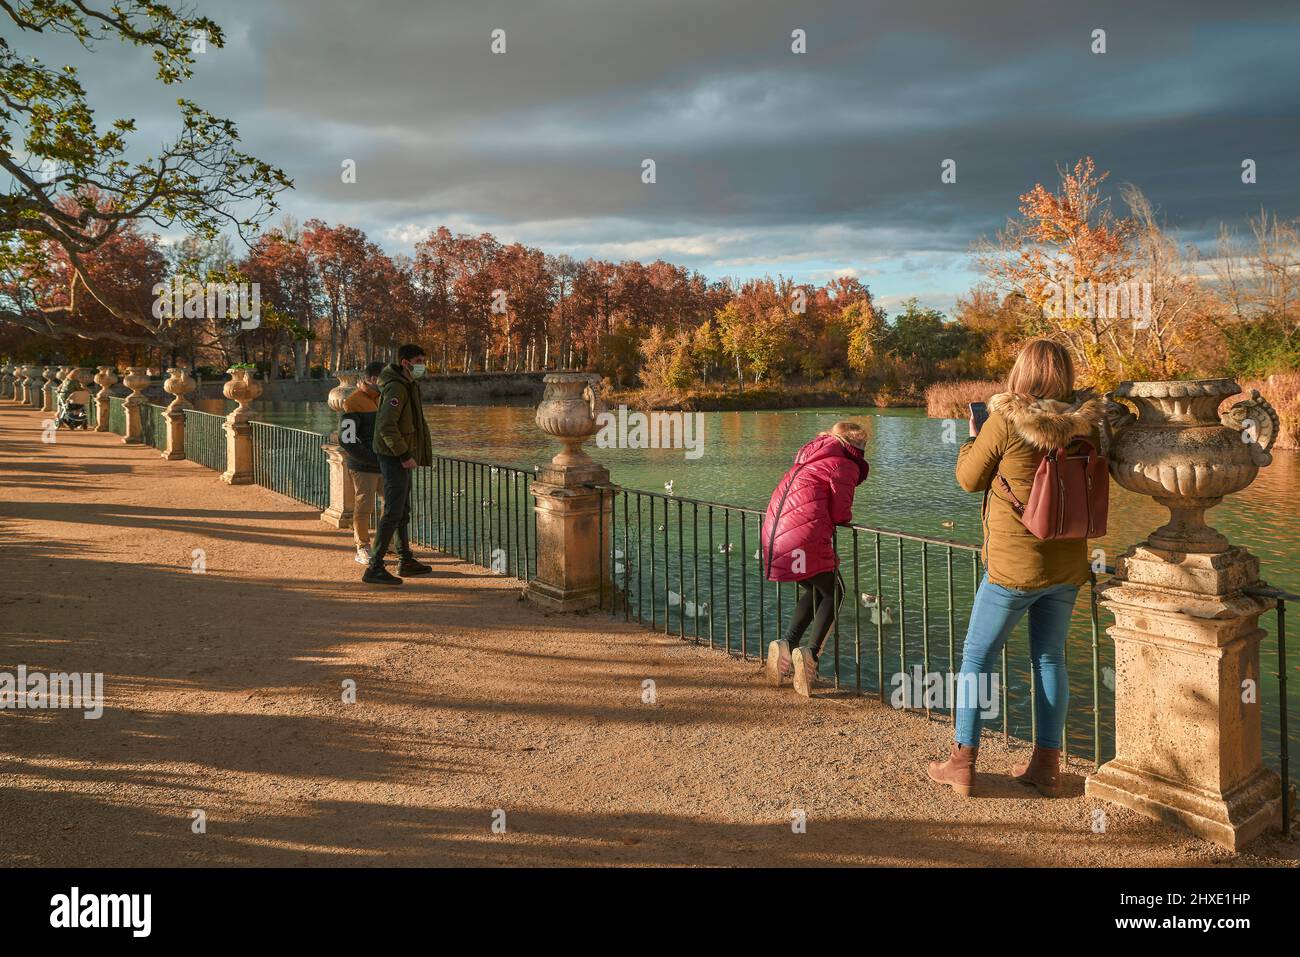 woman taking a photo of a girl who is looking at the ducks of the Tagus river in the viewpoint of the Parterre garden in Aranjuez, Madrid, Spain. Stock Photo